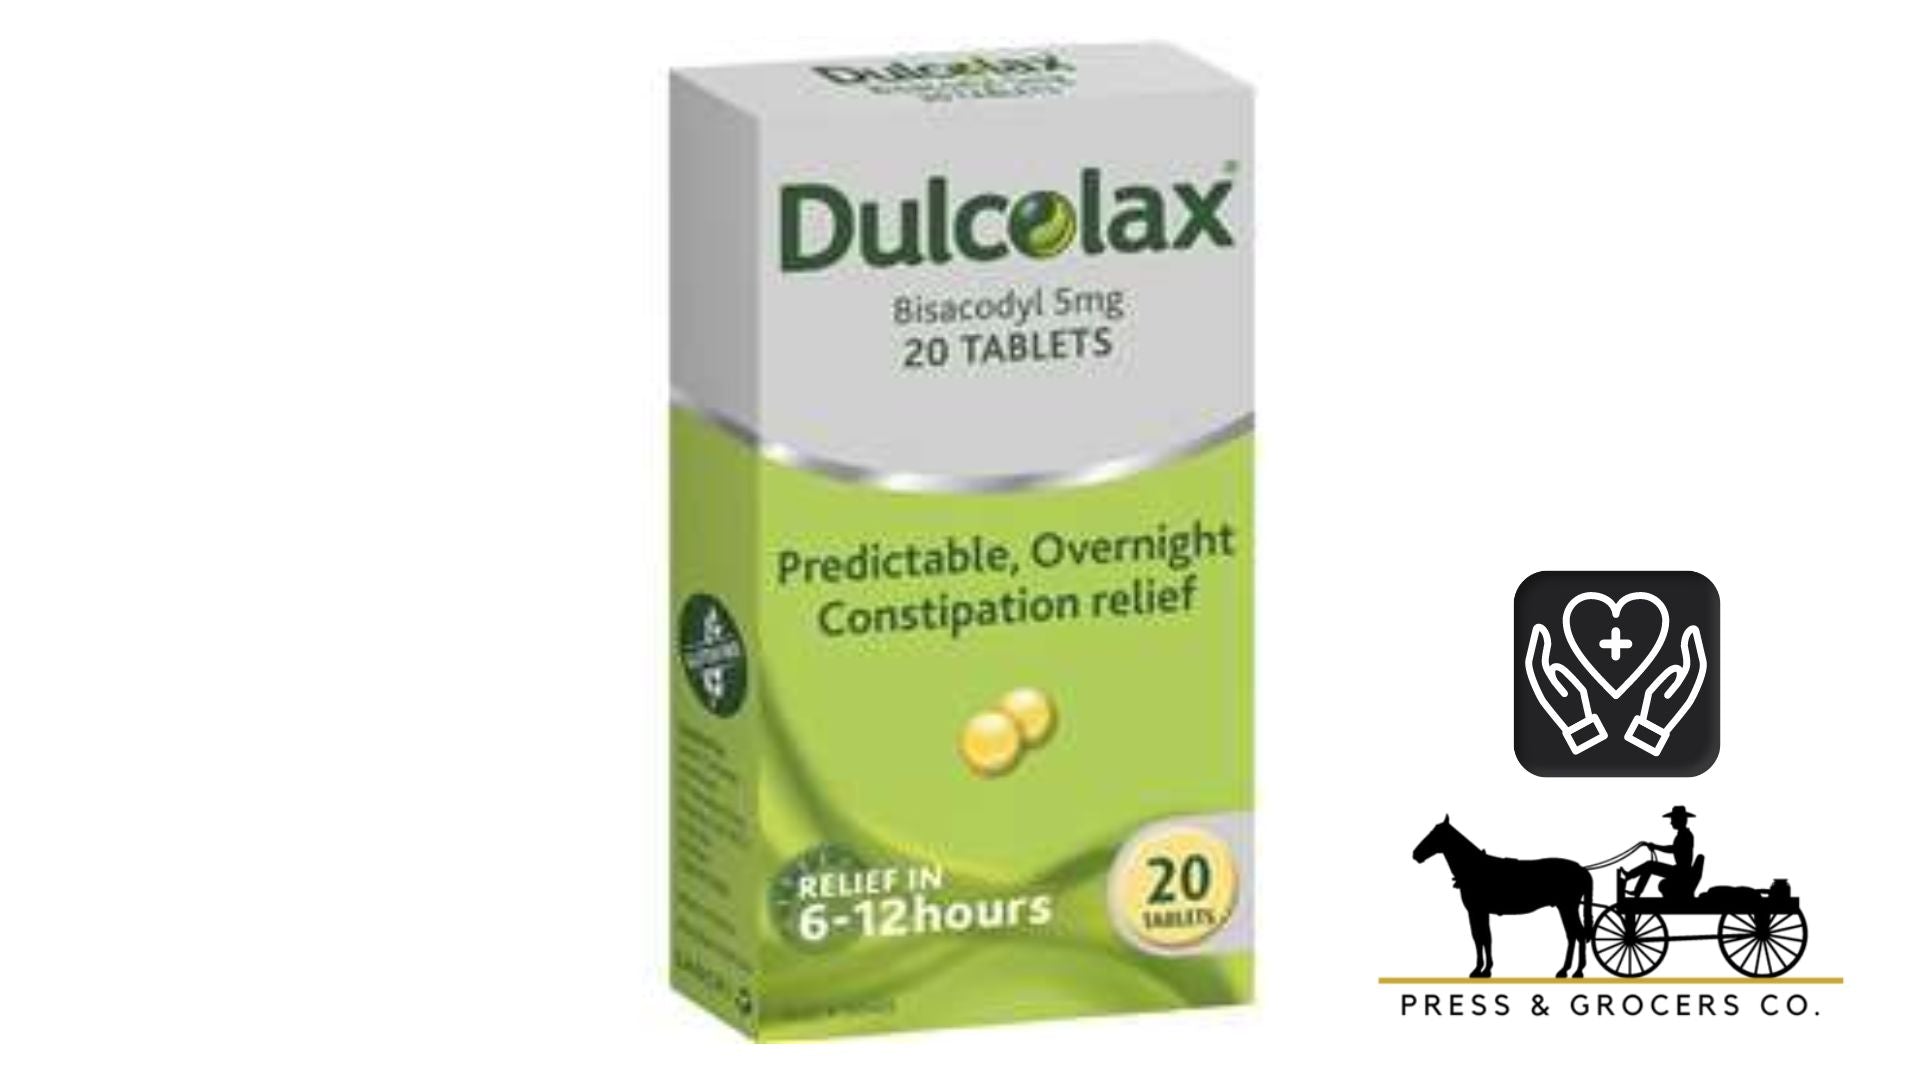 Dulcolax Constipation Relief 5mg 20 Tablets